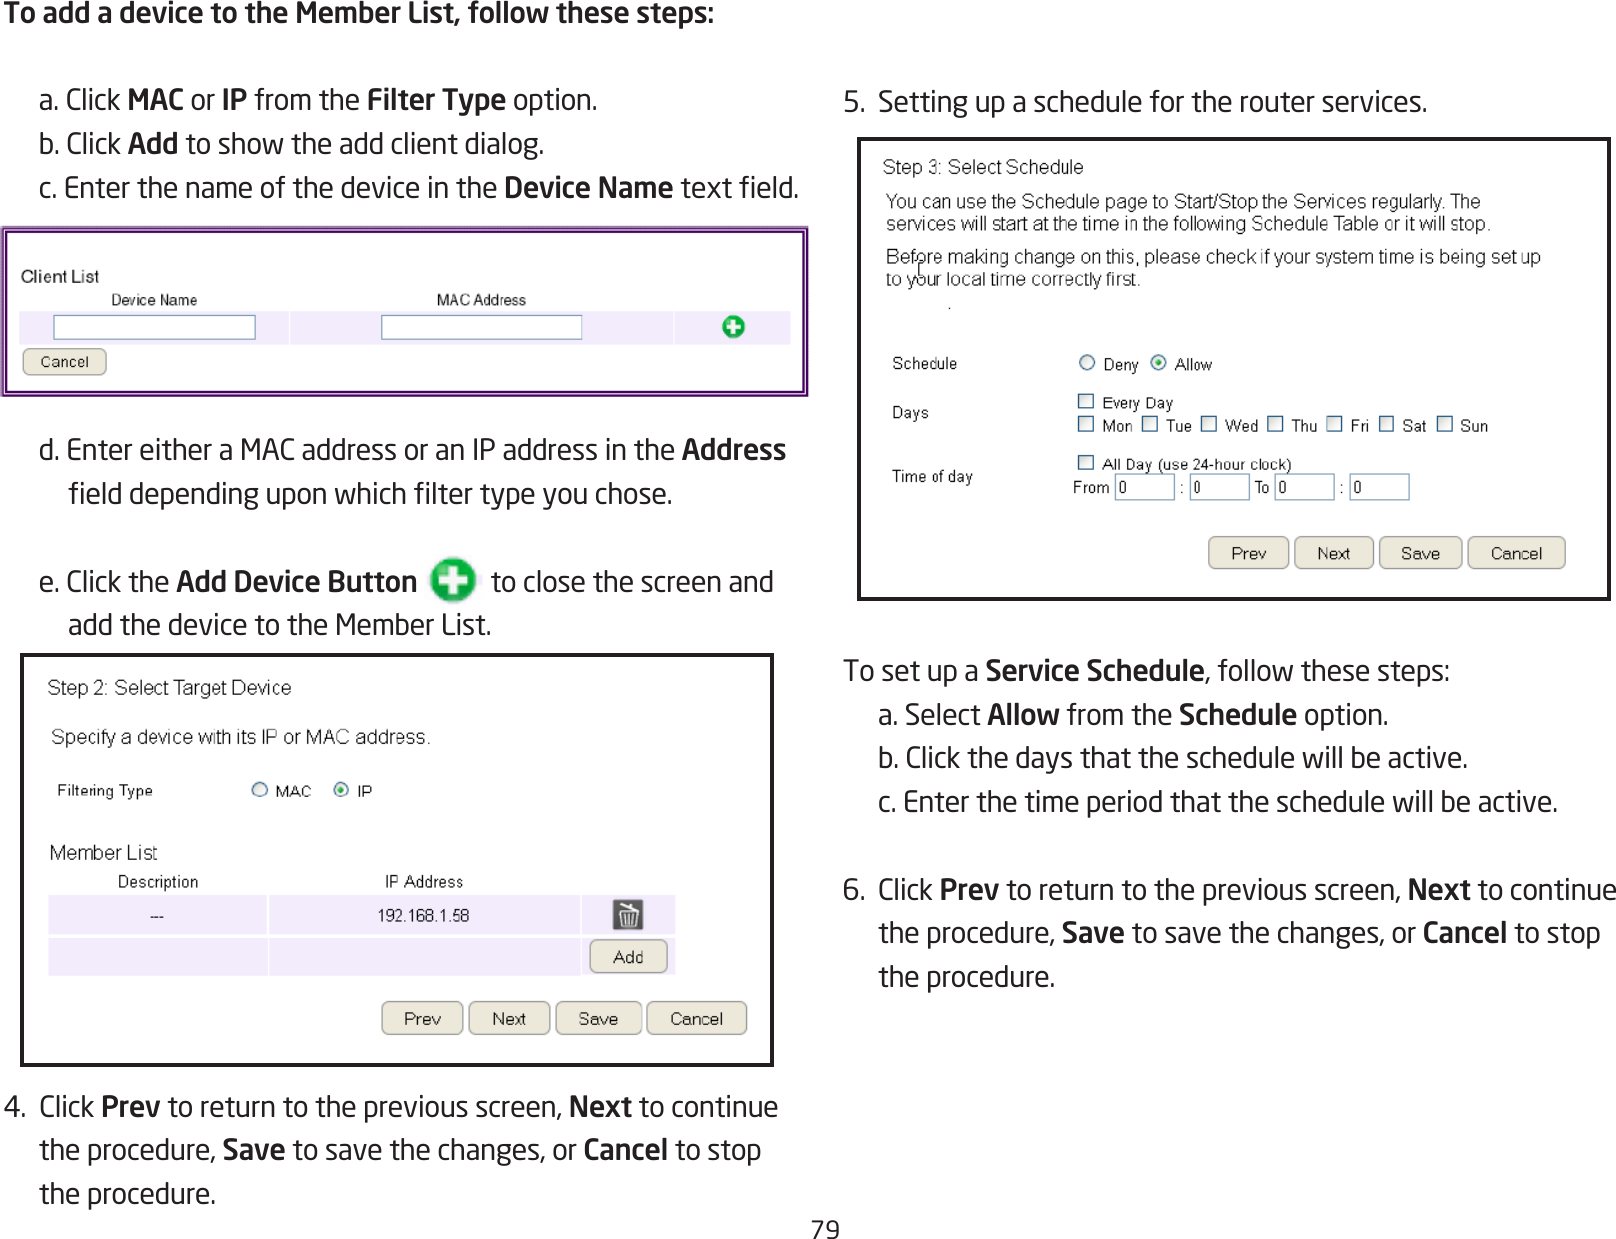 795.  Setting up a schedule for the router services.To set up a Service Schedule,followthesesteps:  a. Select Allow from the Schedule option. b.Clickthedaysthattheschedulewillbeactive. c.Enterthetimeperiodthattheschedulewillbeactive.6.ClickPrev to return to the previous screen, Next to continue  the procedure, Save to save the changes, or Cancel to stop    the procedure.To add a device to the Member List, follow these steps: a.ClickMAC or IP from the Filter Type option. b.ClickAddtoshowtheaddclientdialog.  c. Enter the name of the device in the Device Nametexteld. d.EntereitheraMACaddressoranIPaddressintheAddress    elddependinguponwhichltertypeyouchose. e.ClicktheAdd Device Button           to close the screen and    addthedevicetotheMemberList.4.ClickPrev to return to the previous screen, Next to continue  the procedure, Save to save the changes, or Cancel to stop  the procedure.